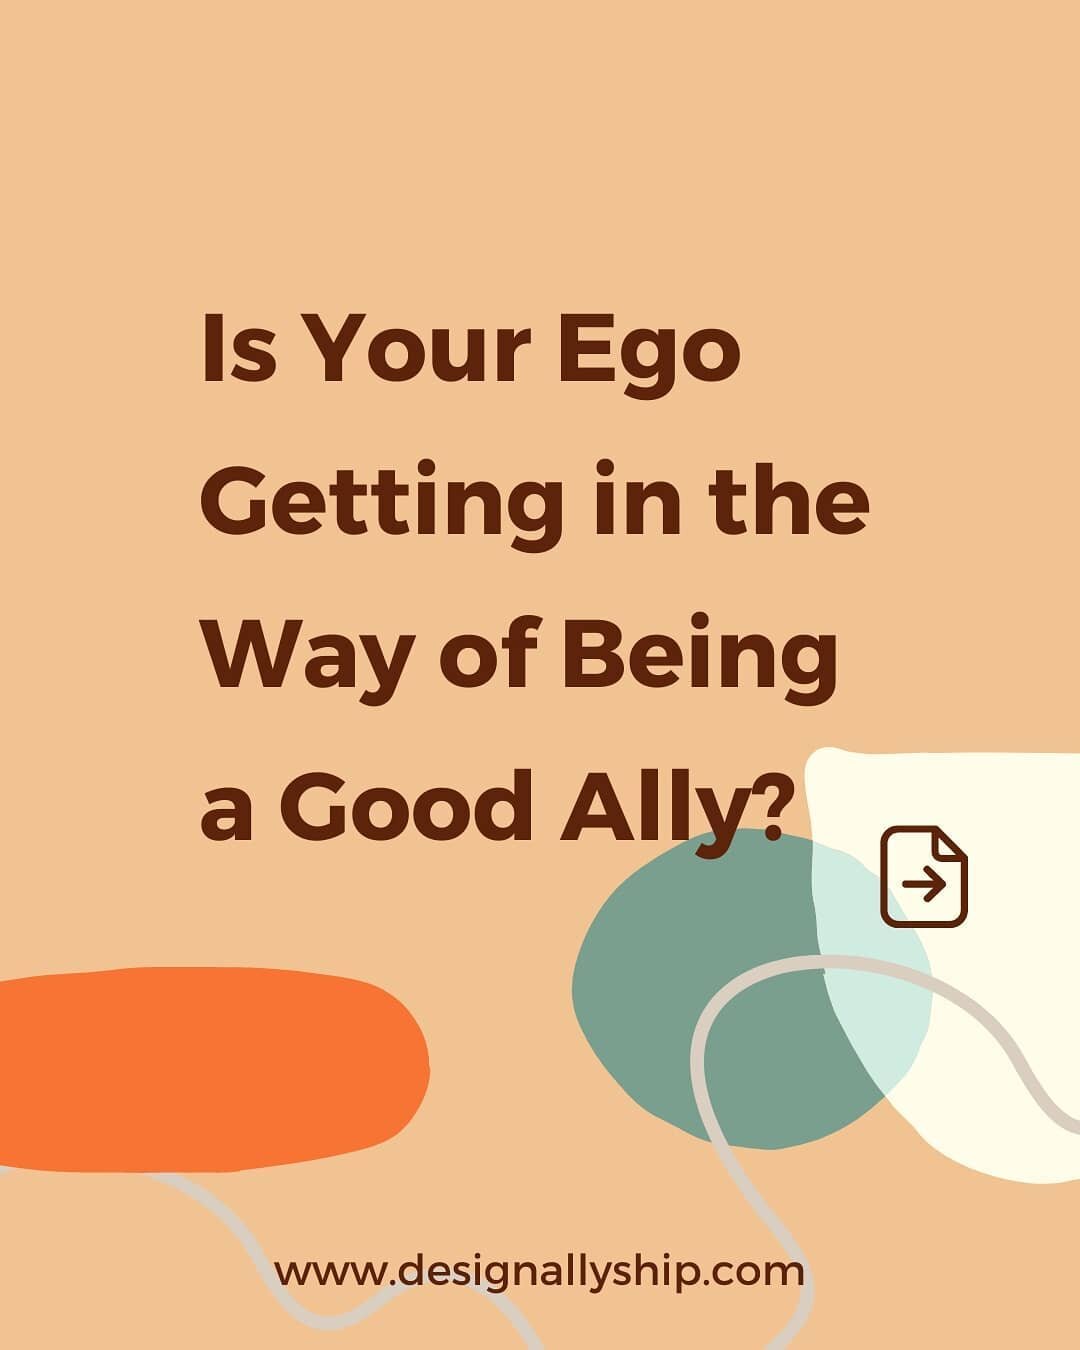 Let's talk about ego. Even the most well-intentioned ally can fall into letting their ego take precedence over the hurt they caused. If you find yourself getting called out, resist justifying and defending your behavior. Everyone messes up sometimes 